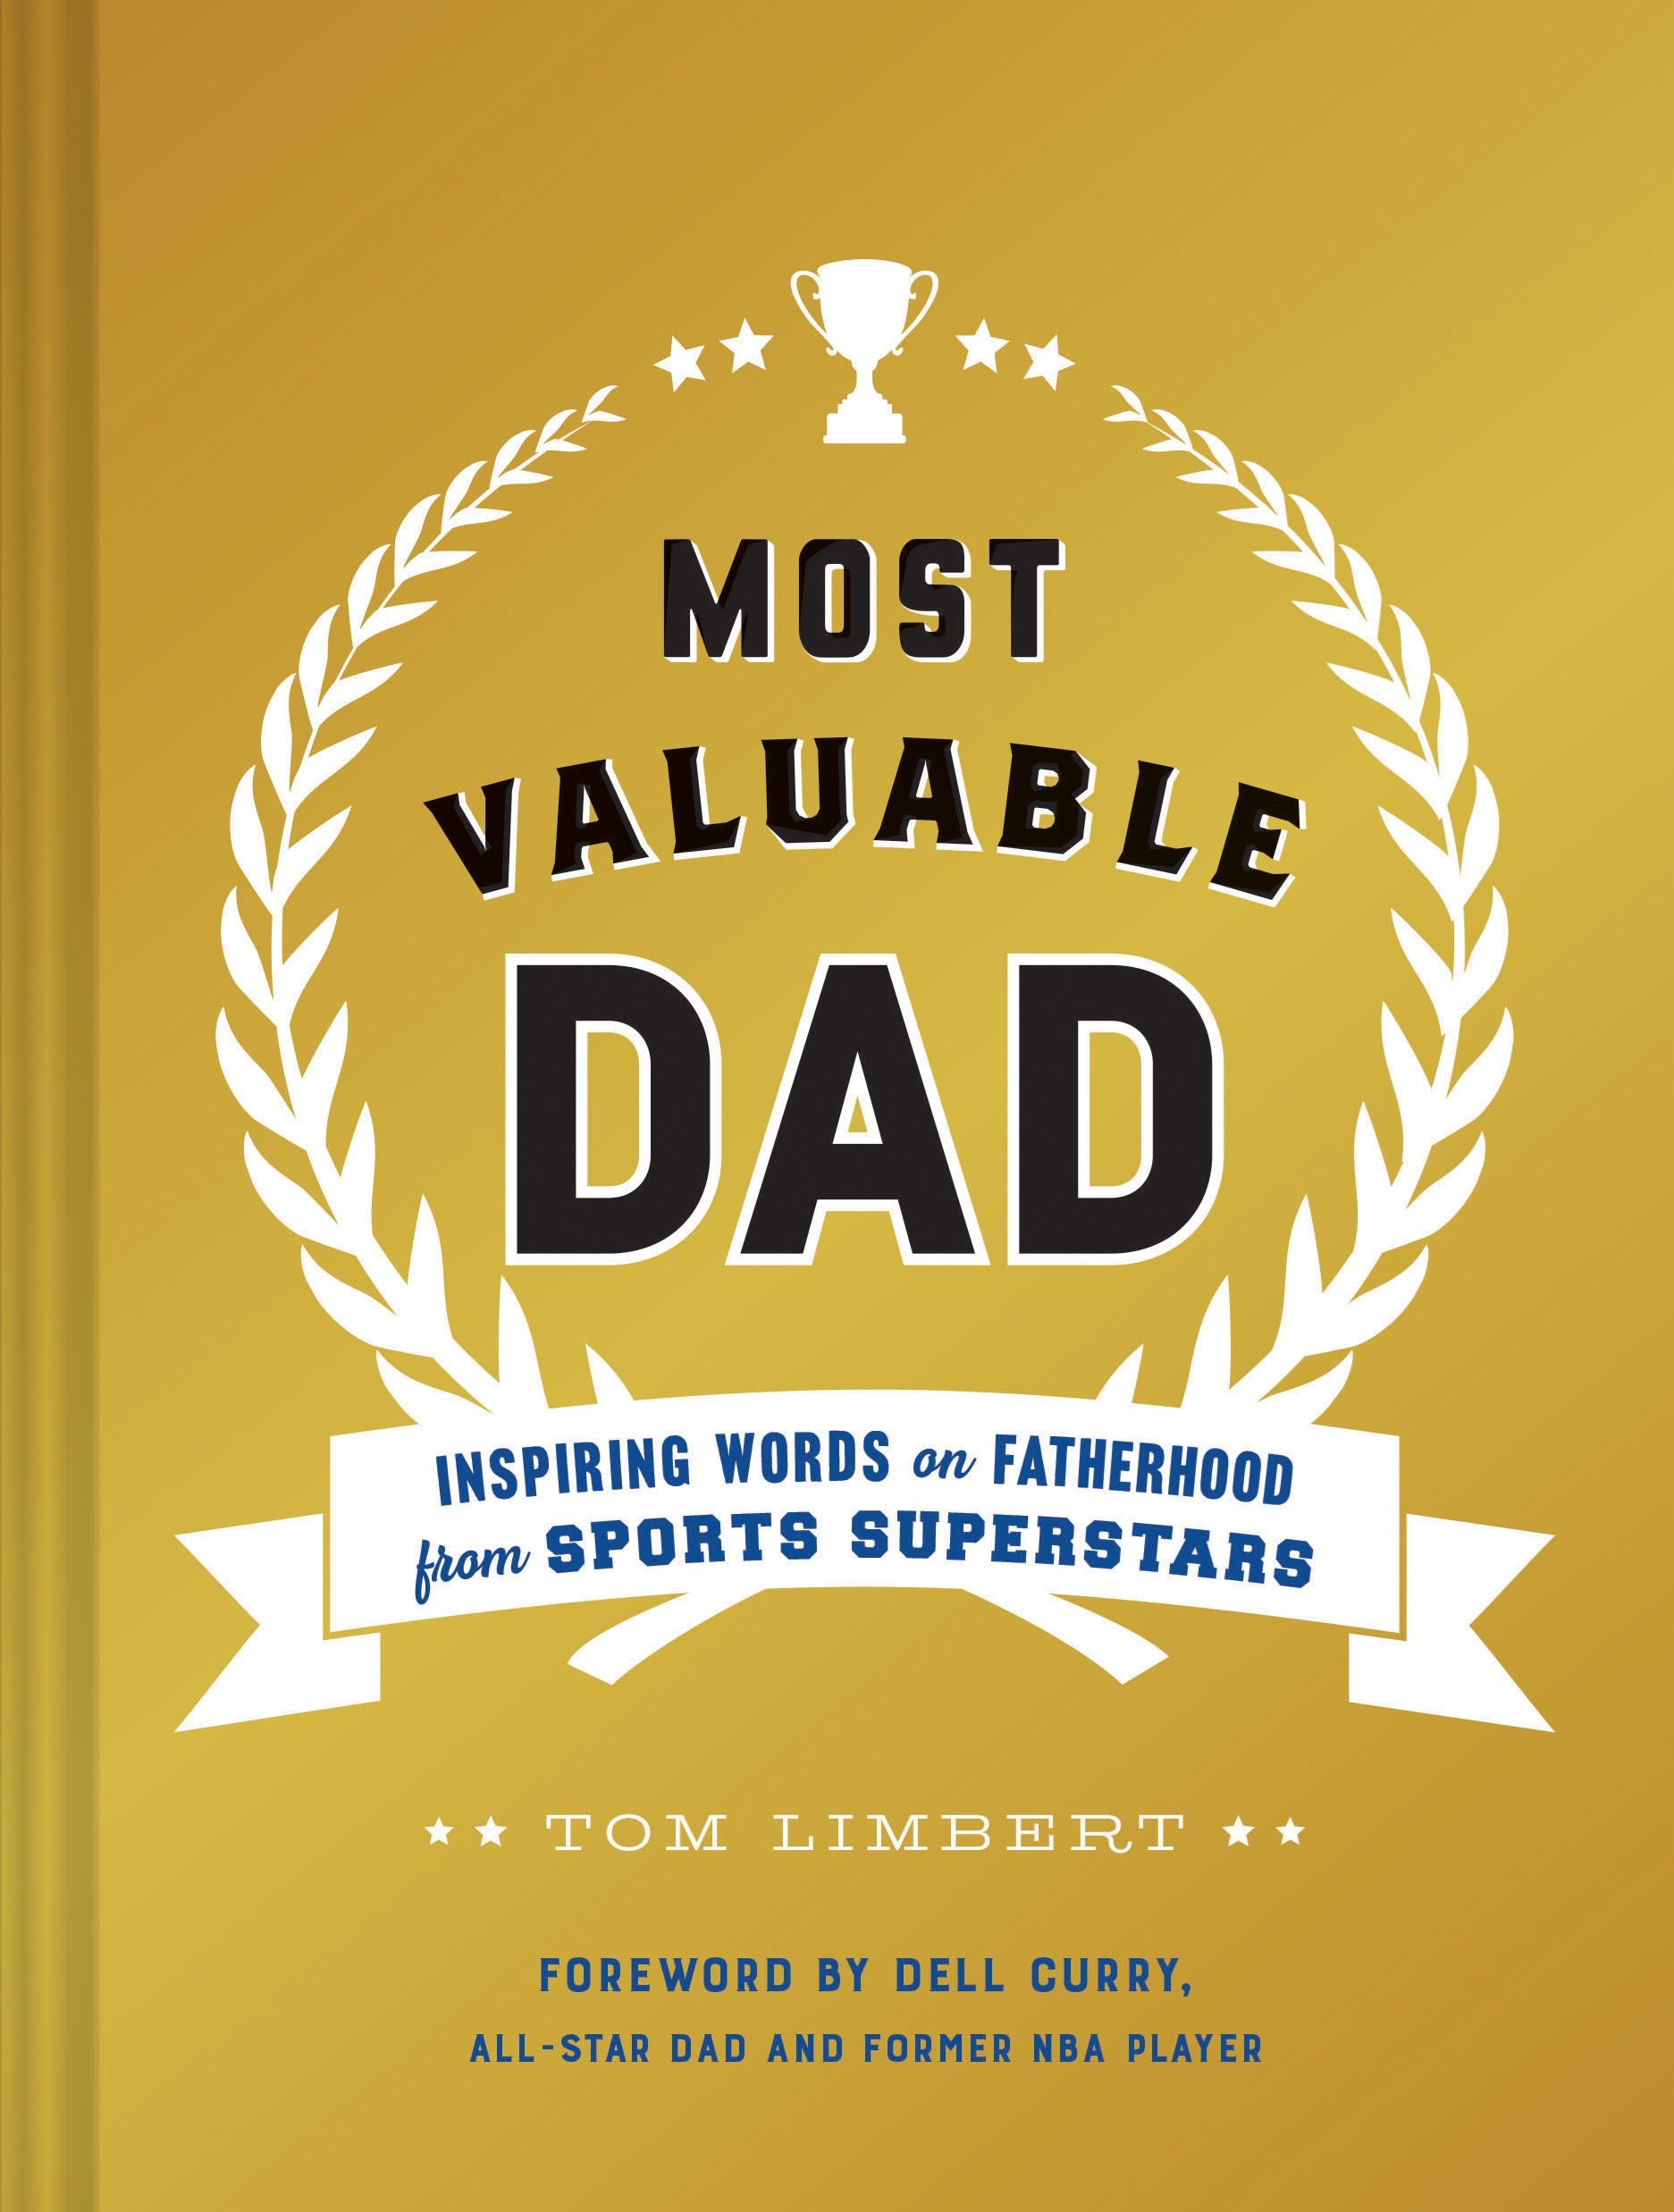 Most Valuable Dad: Inspiring Words on Fatherhood from Sports Superstars (Books for Dads, Fatherhood Books, Gifts for New Dads)